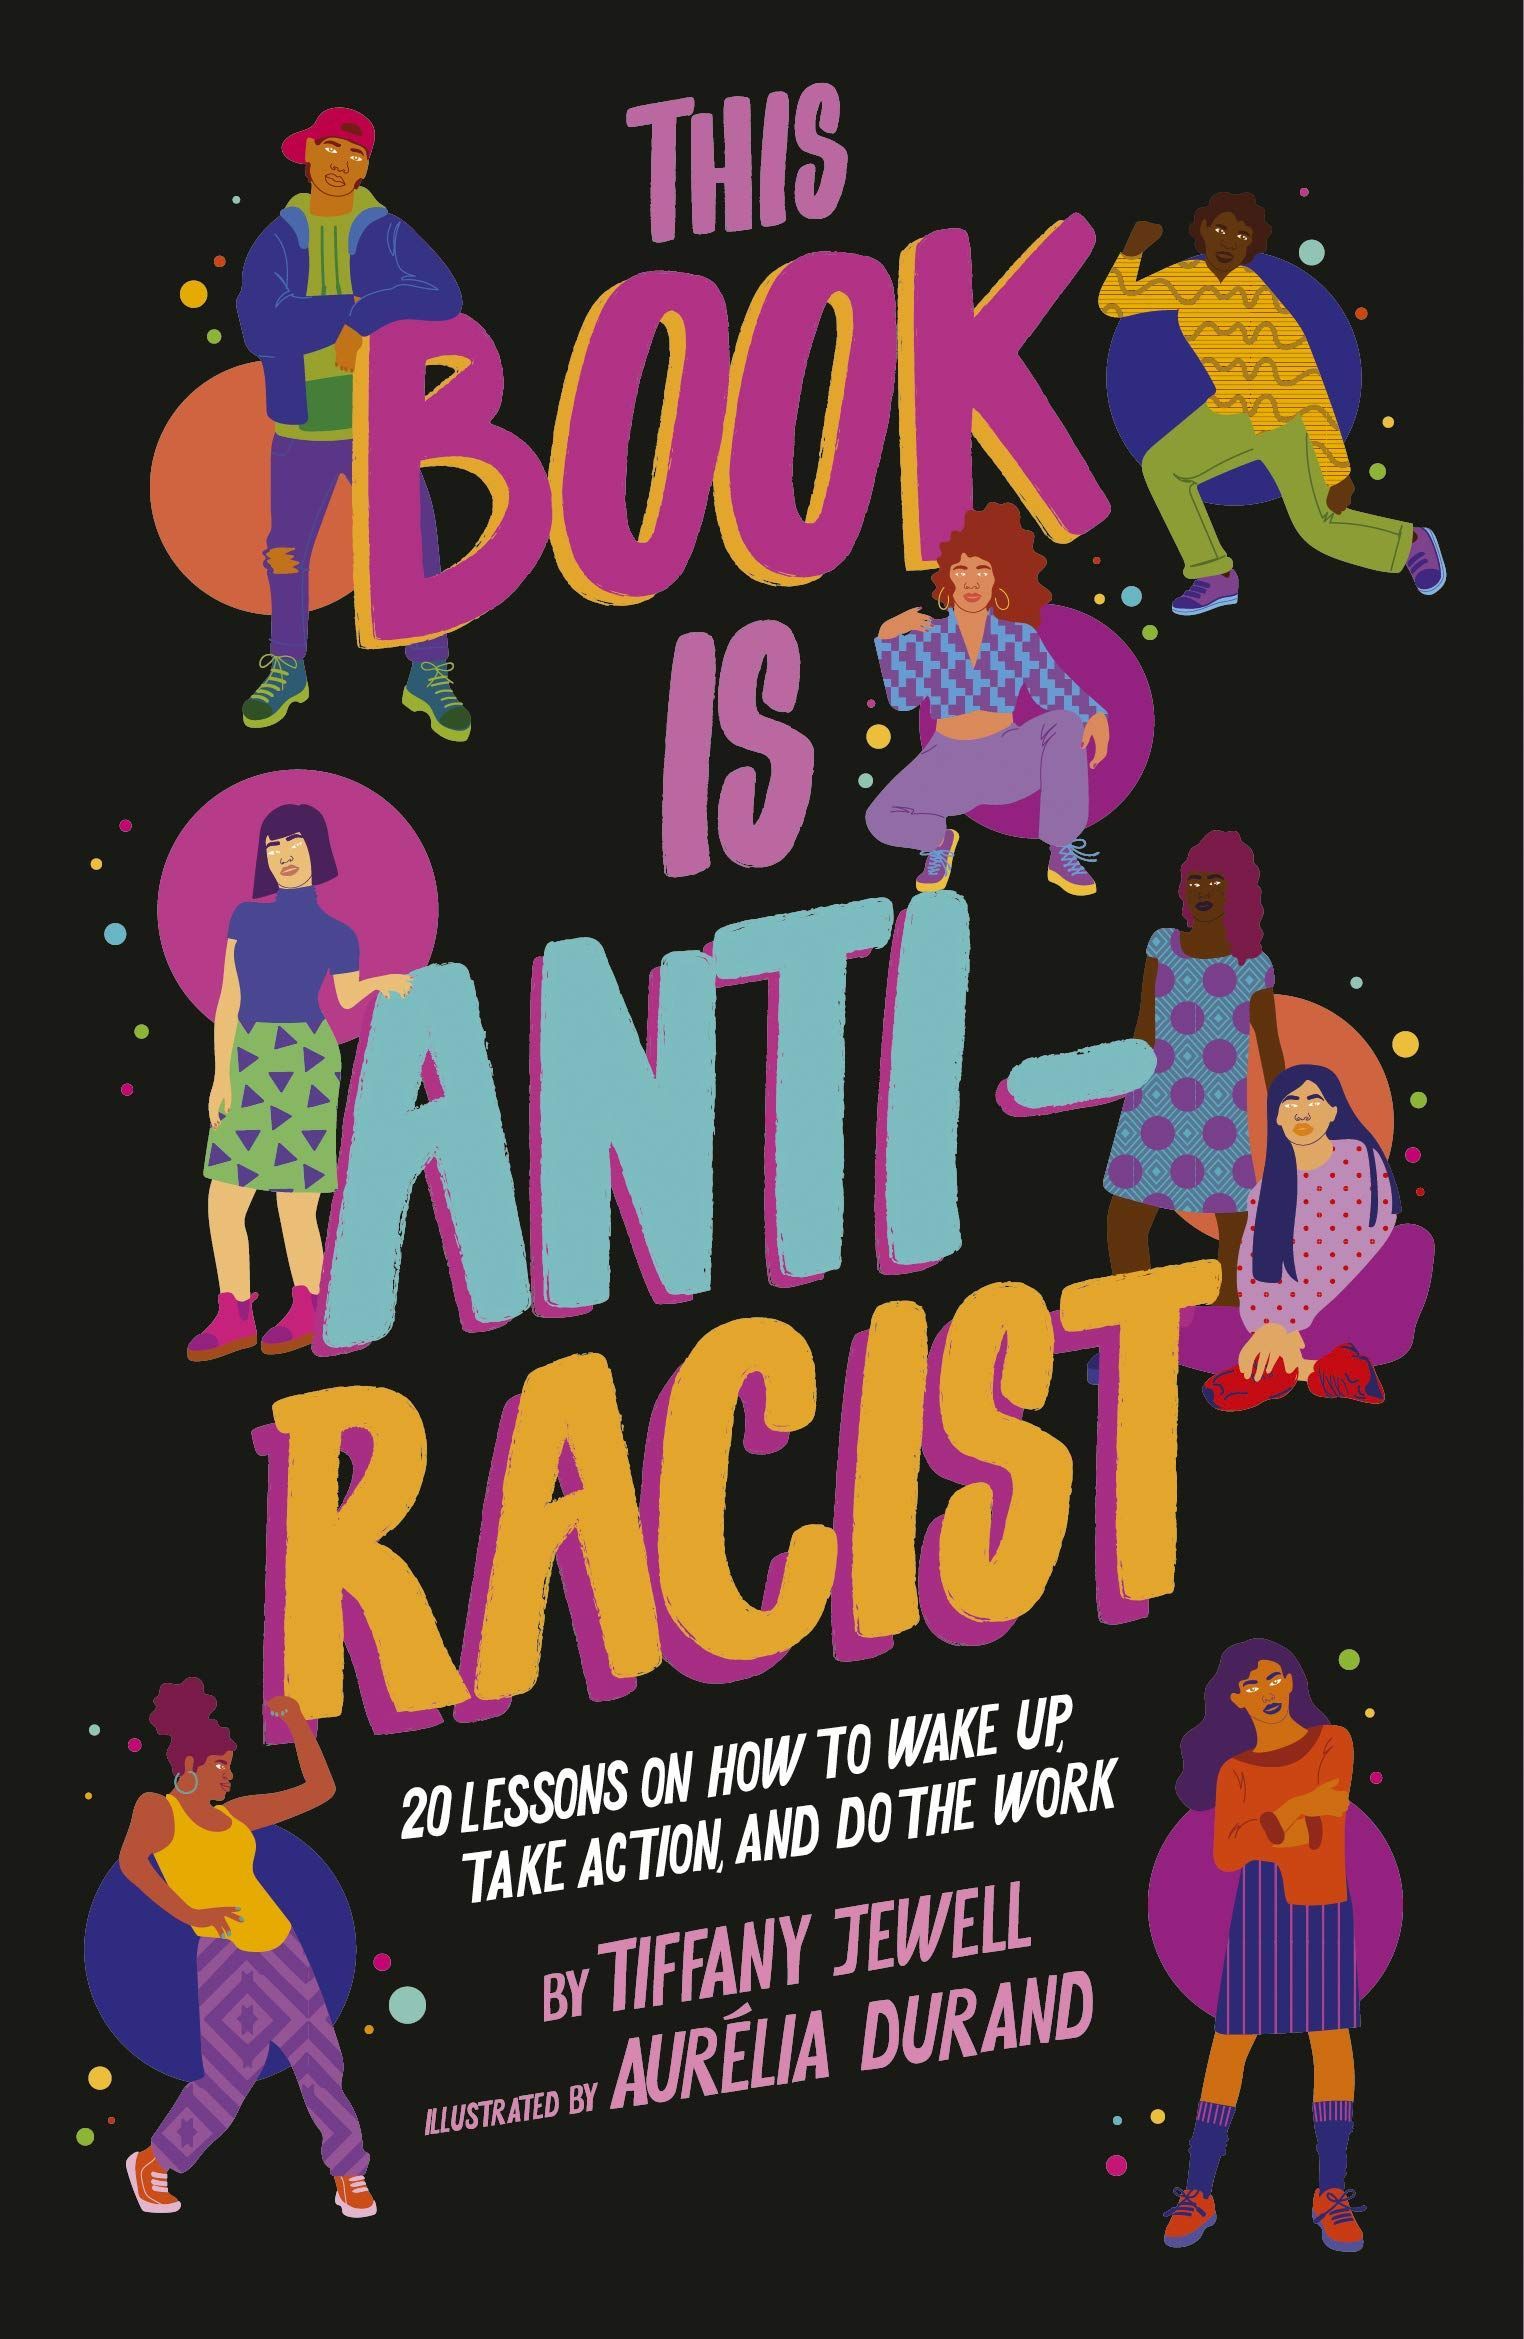 this book is anti racist by tiffany jewell